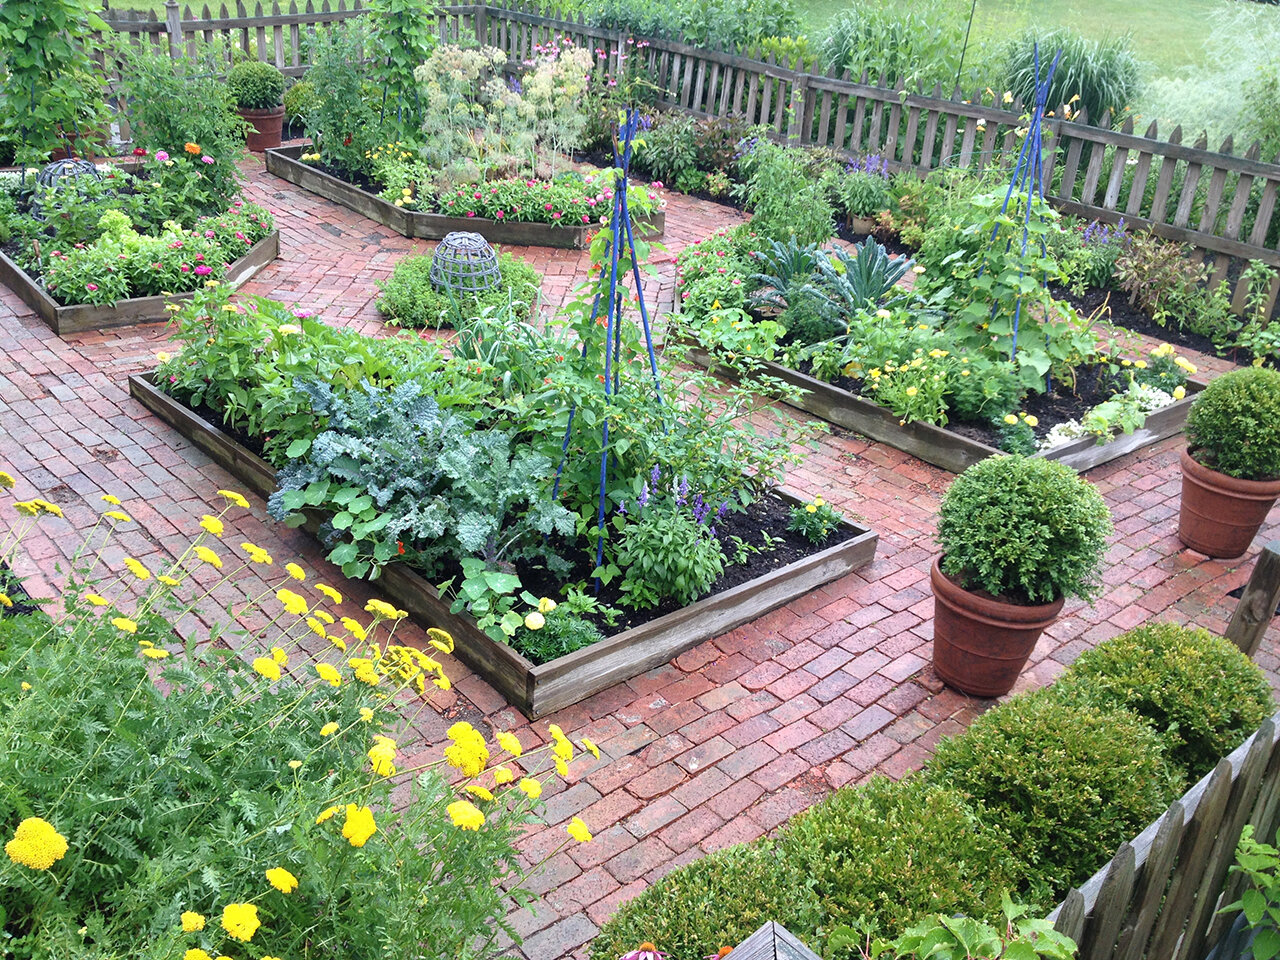 Bartely's potager garden at her former house